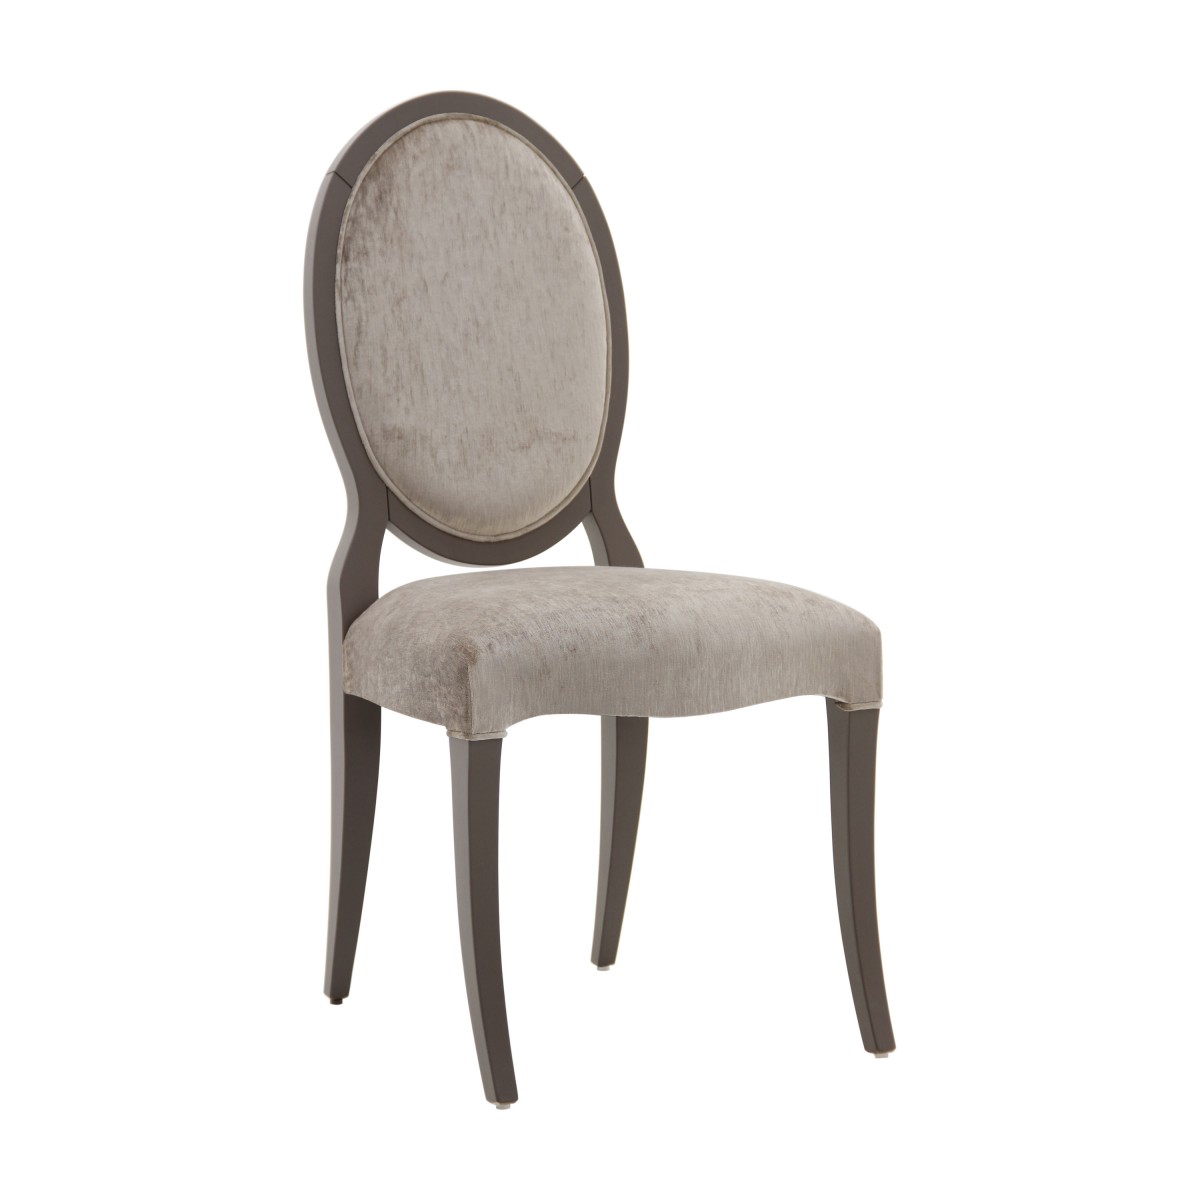 Contemporary italian chair Matilde by Sevensedie -  beech wood structure - padded back - upholstered with a soft grey velvet